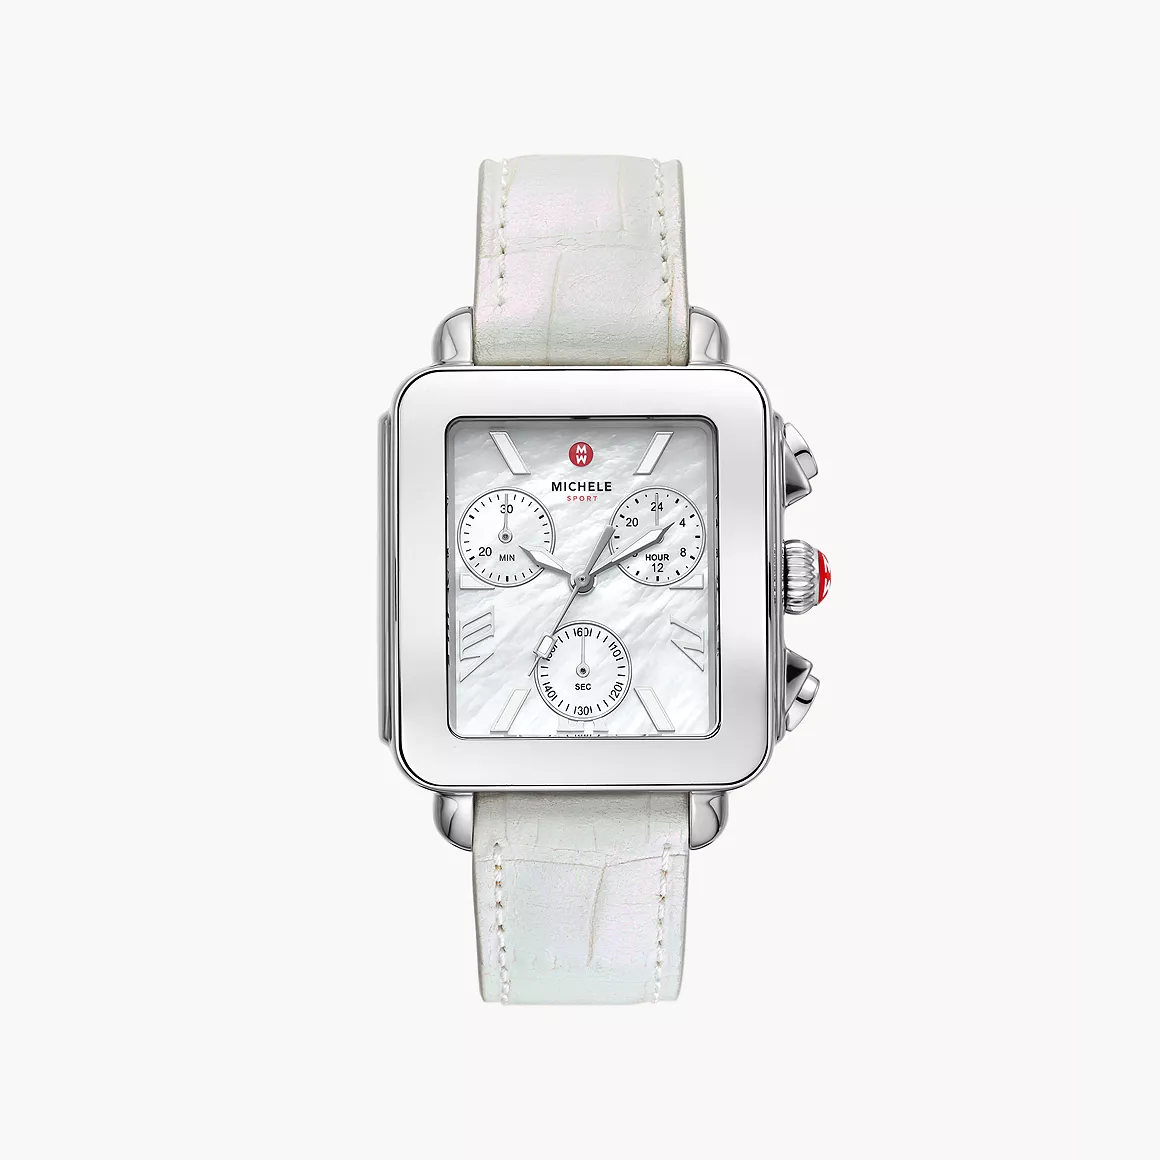 Michele Deco Sport Chronograph White Leather Watch